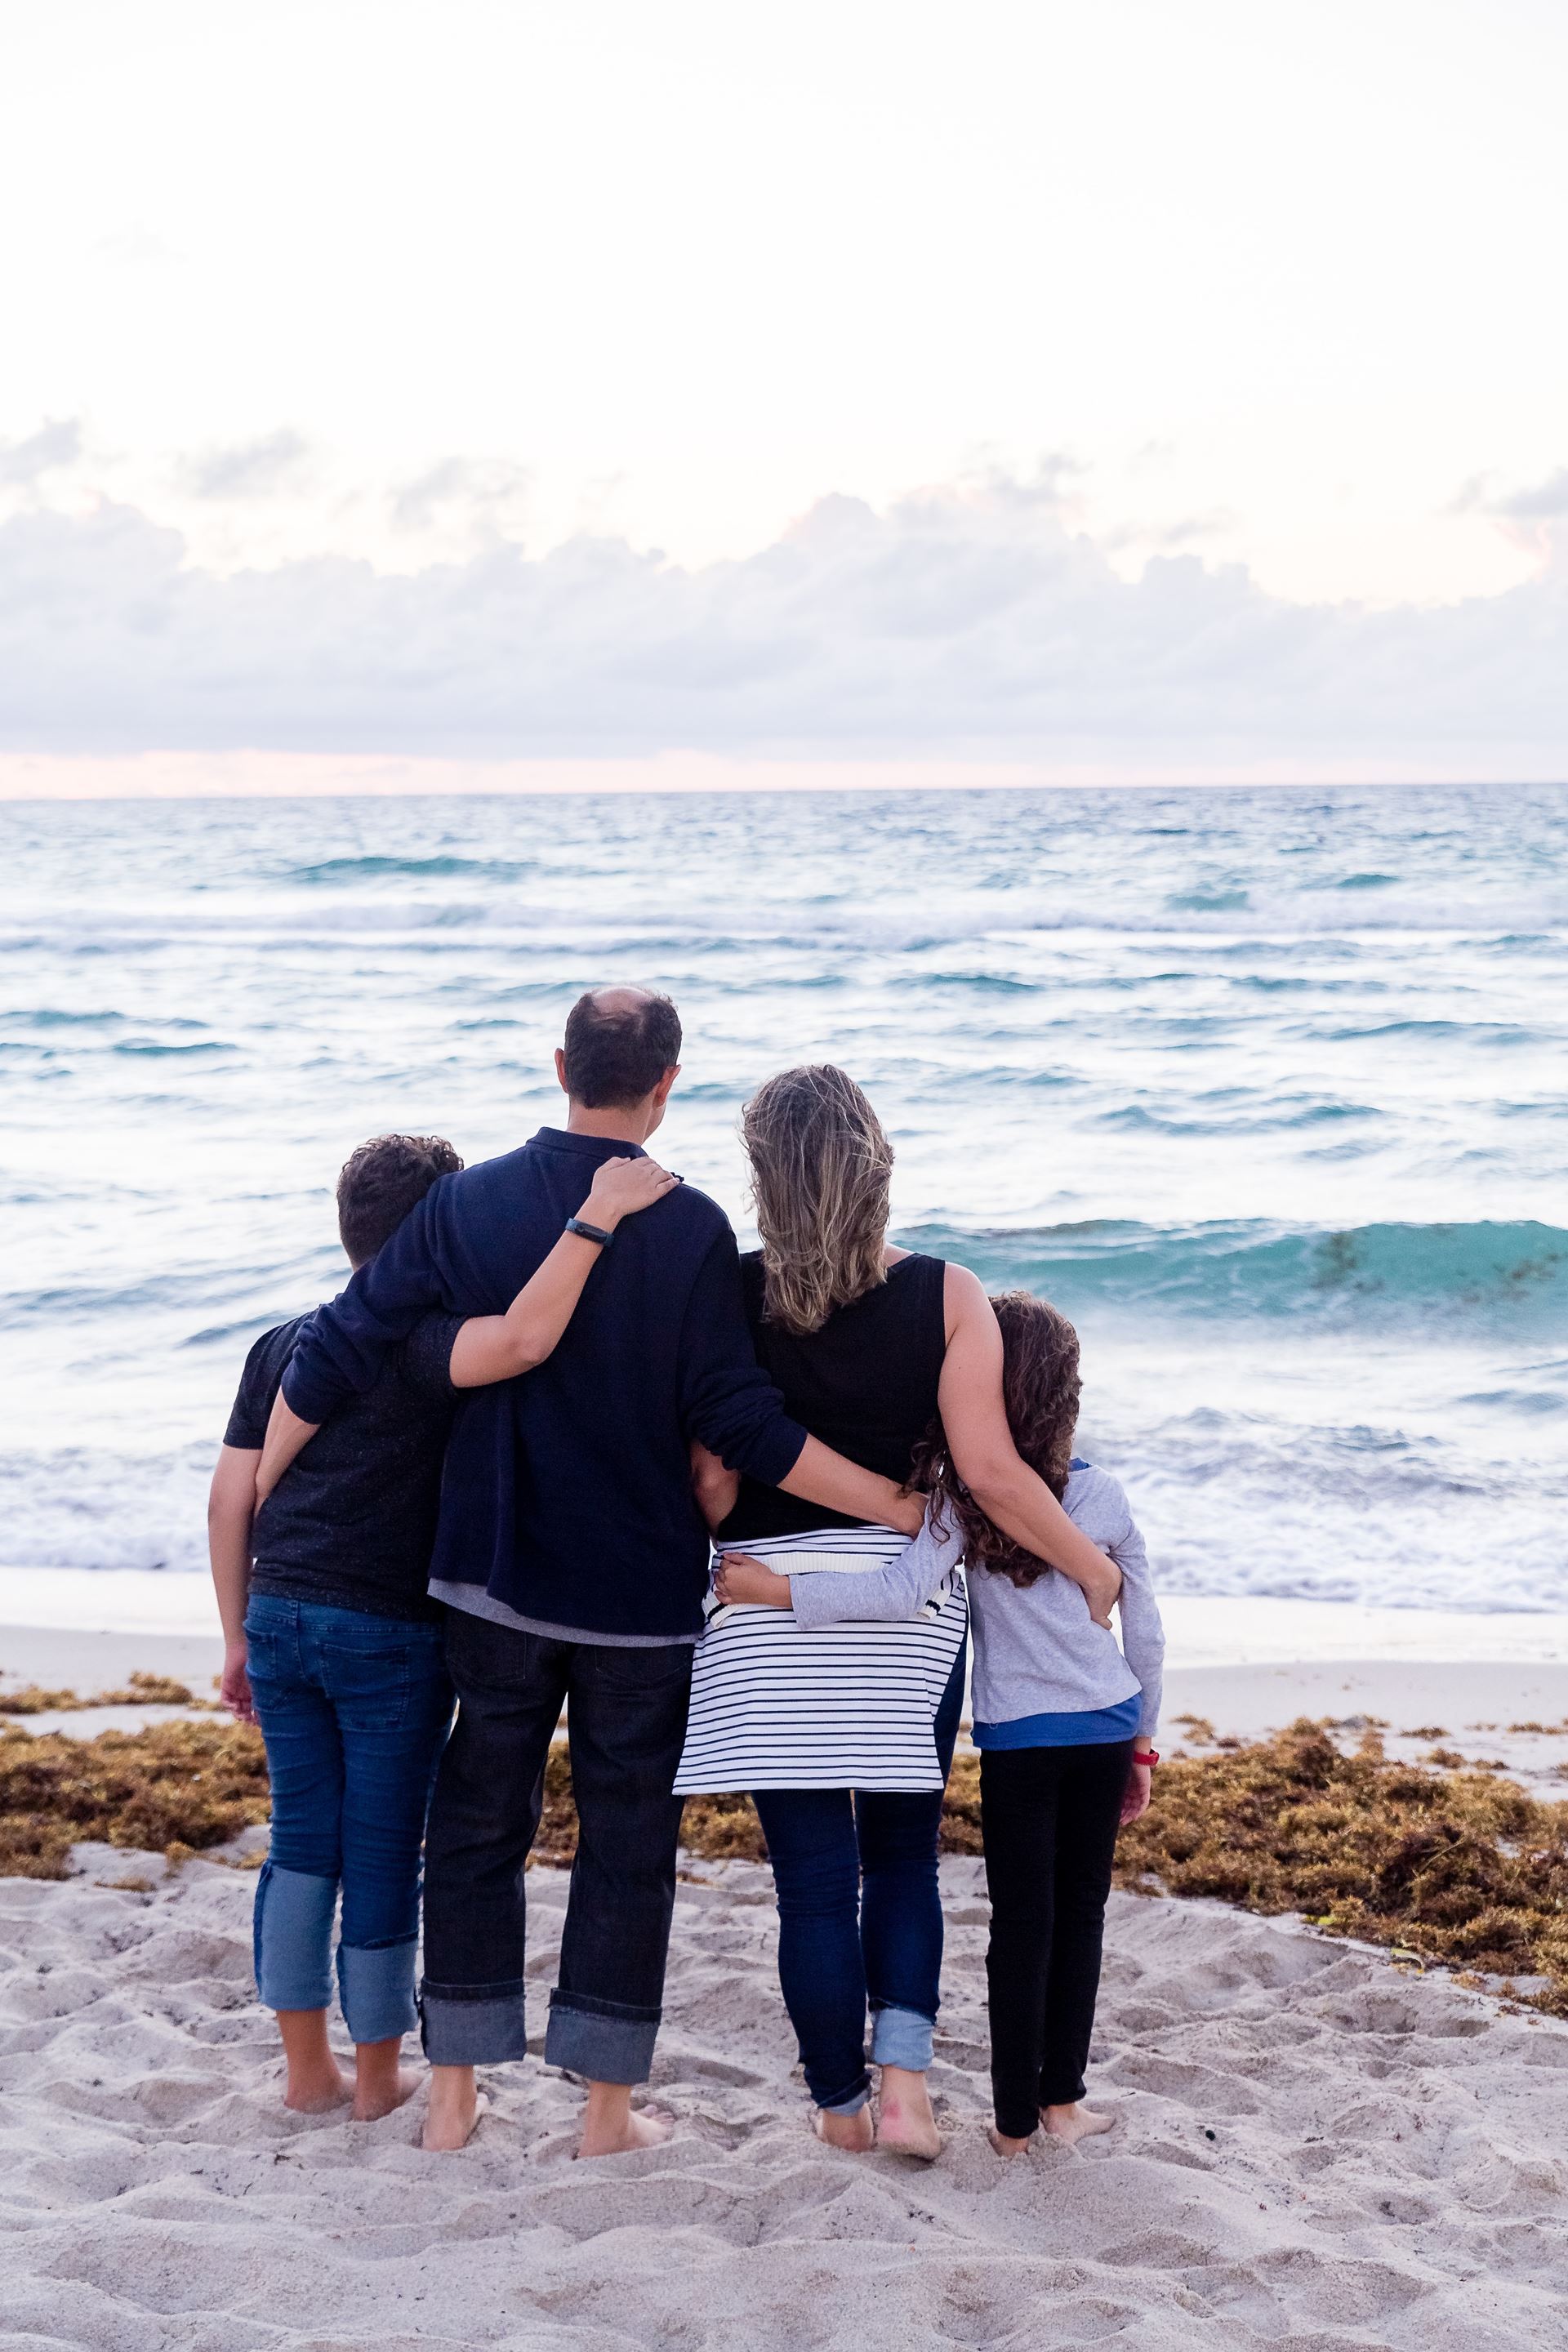 A family of two parents and two children on a beach looking at the sea